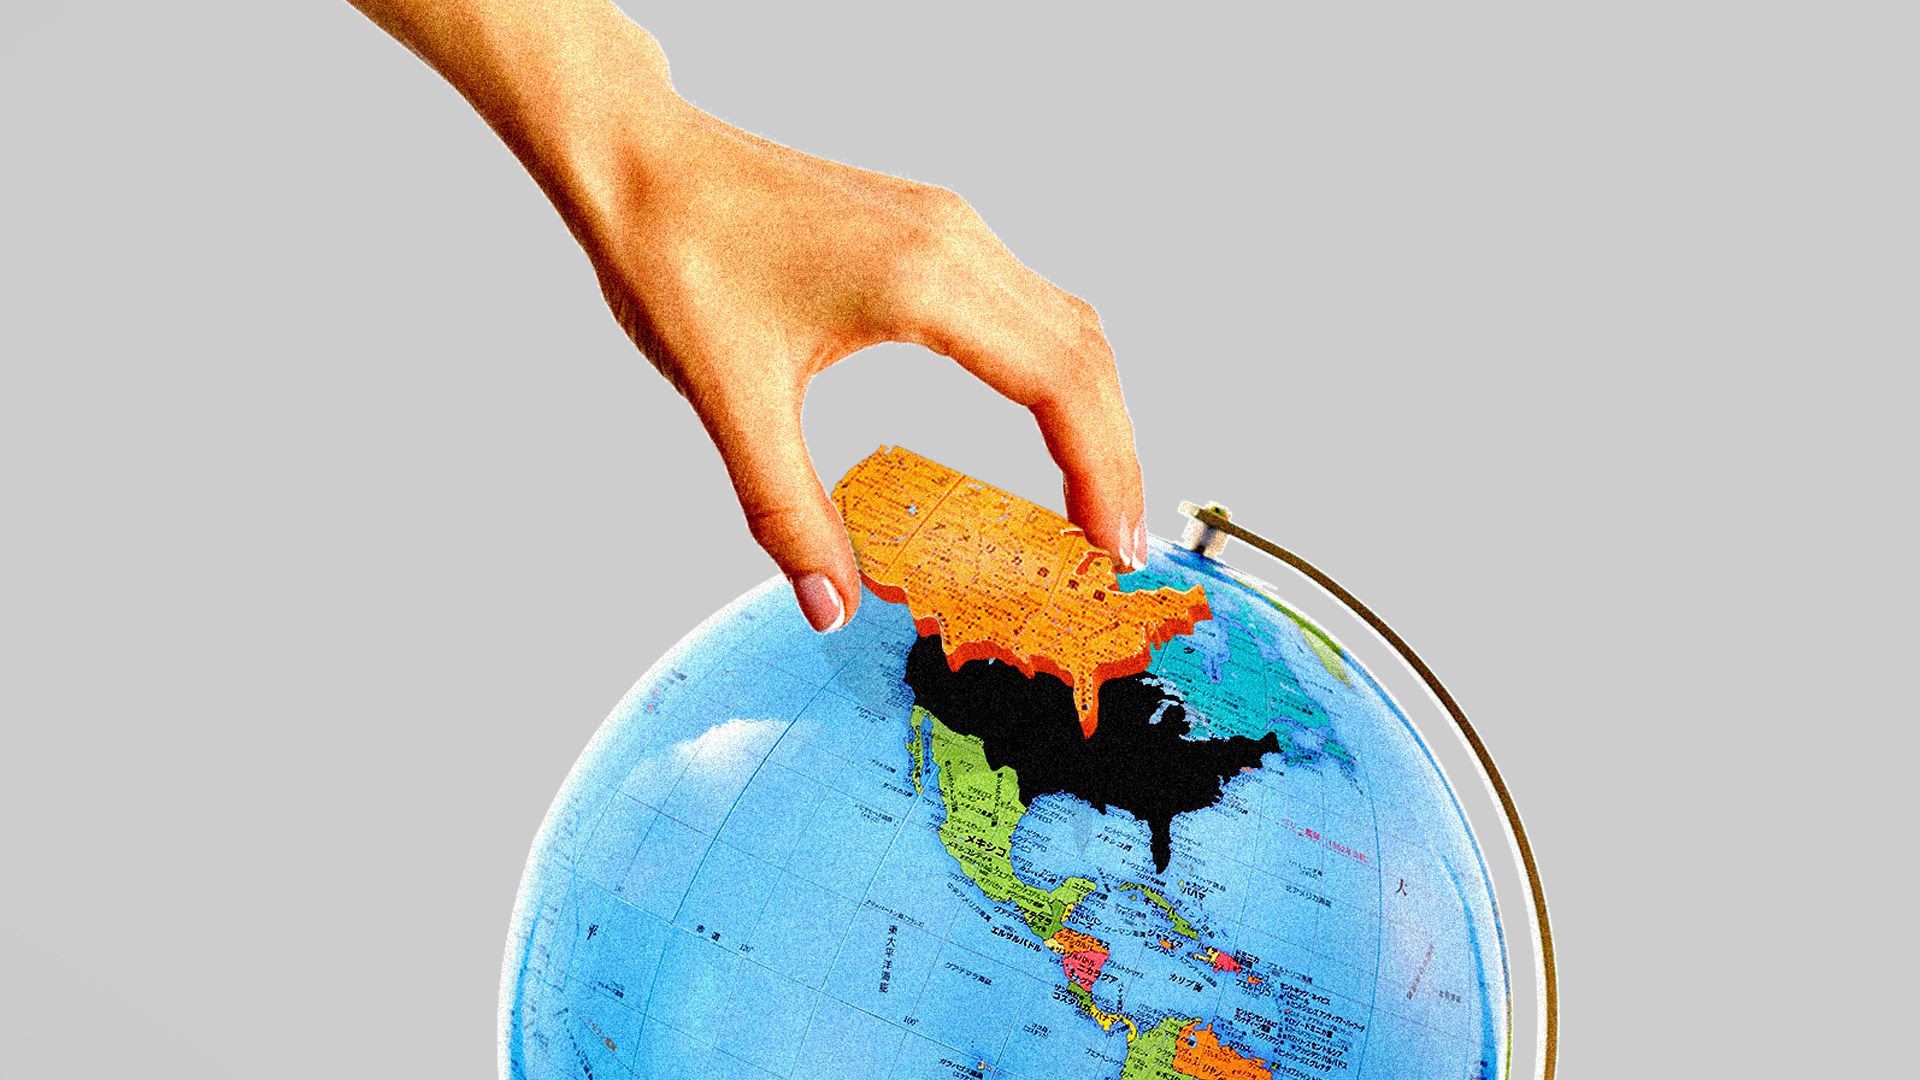 An illustration of the U.S. being taken off a globe